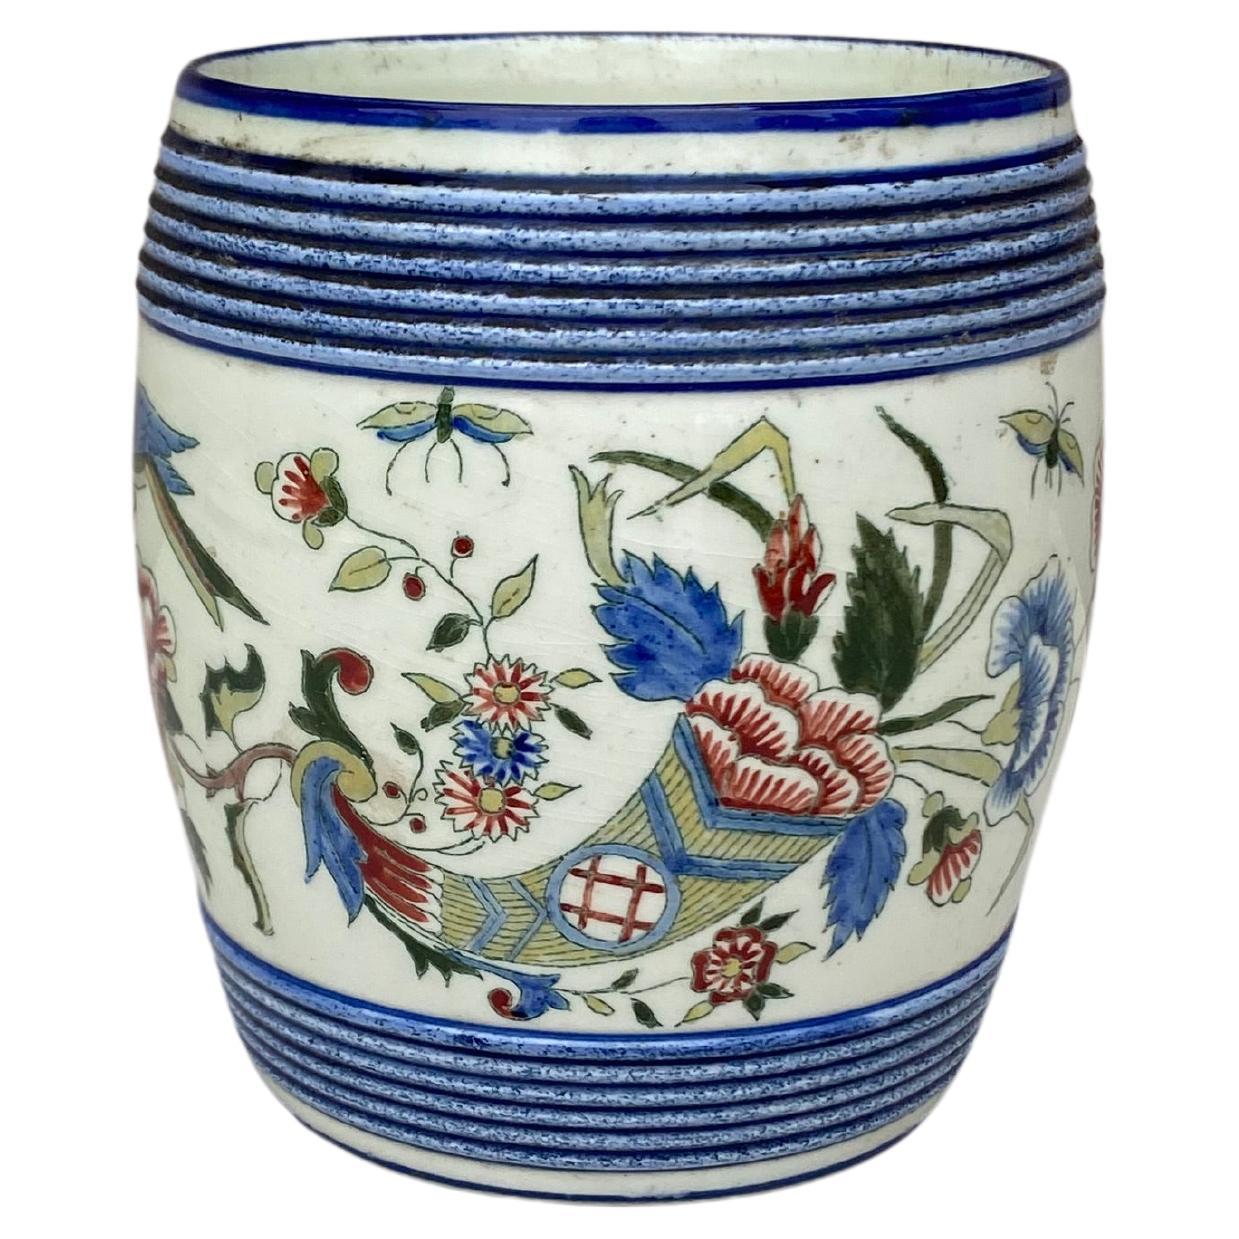 French Faience Vase Gien Circa 1890.
Asian inspiration.
Decorated with peonies and pheasants.
    